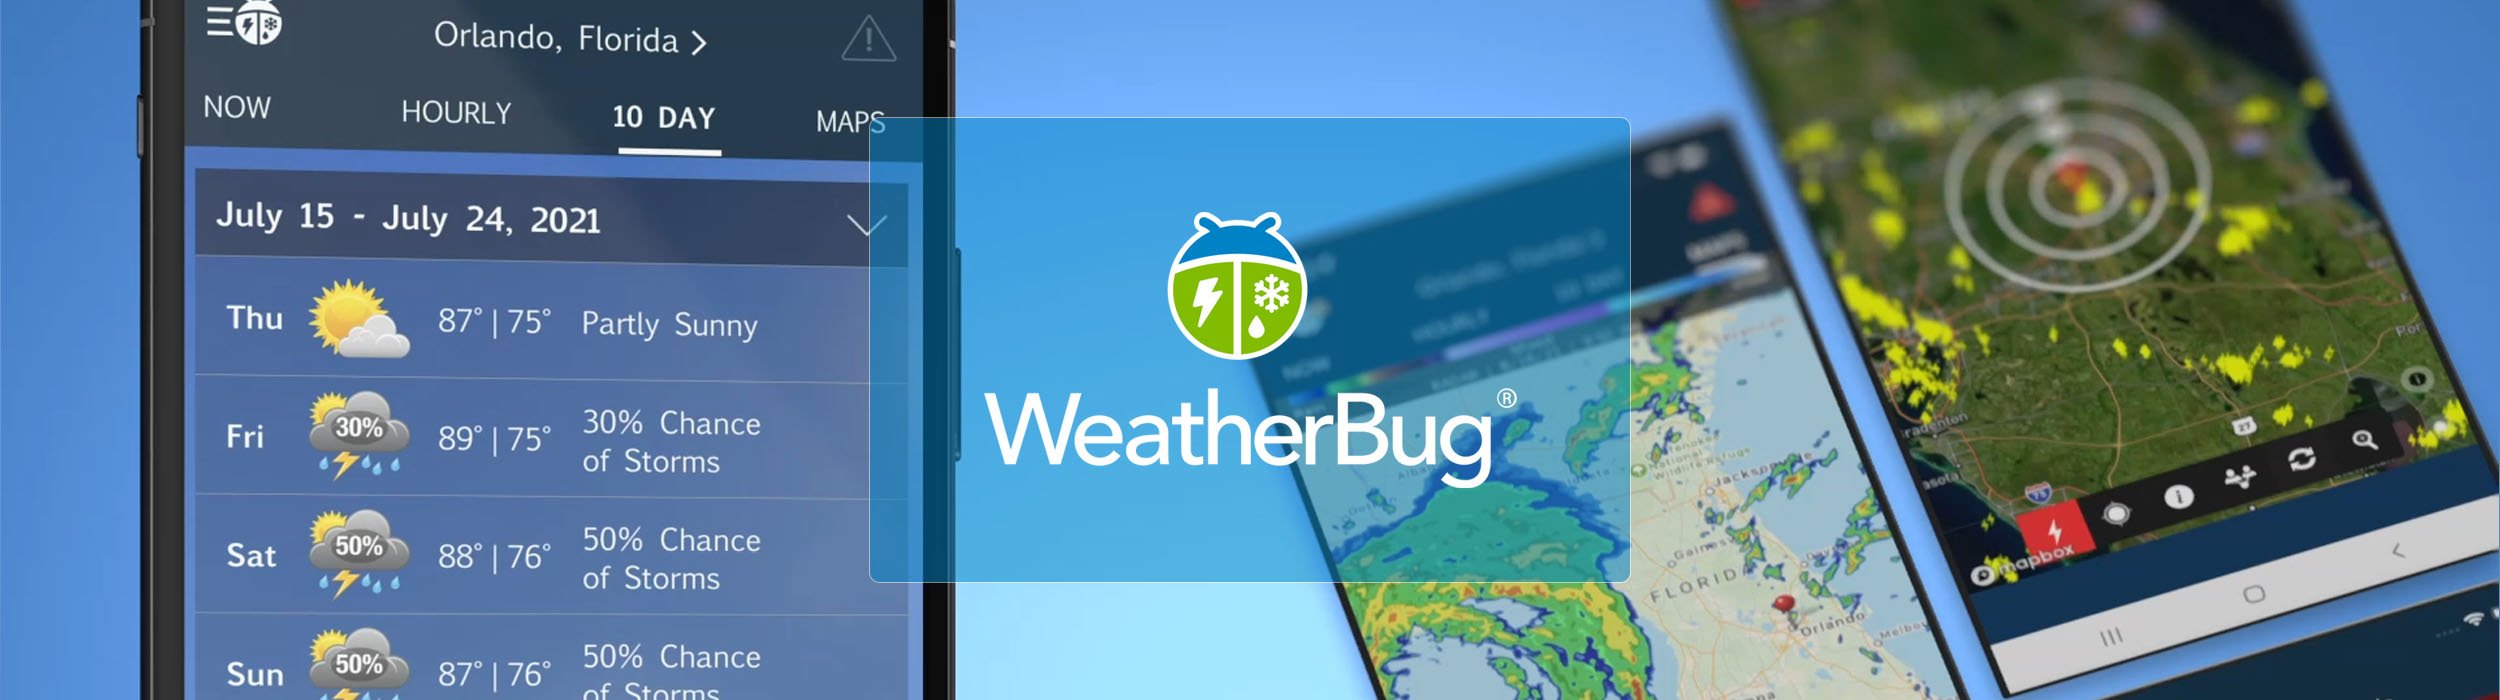 WeatherBug Launches a Growth-Driven National TV campaign